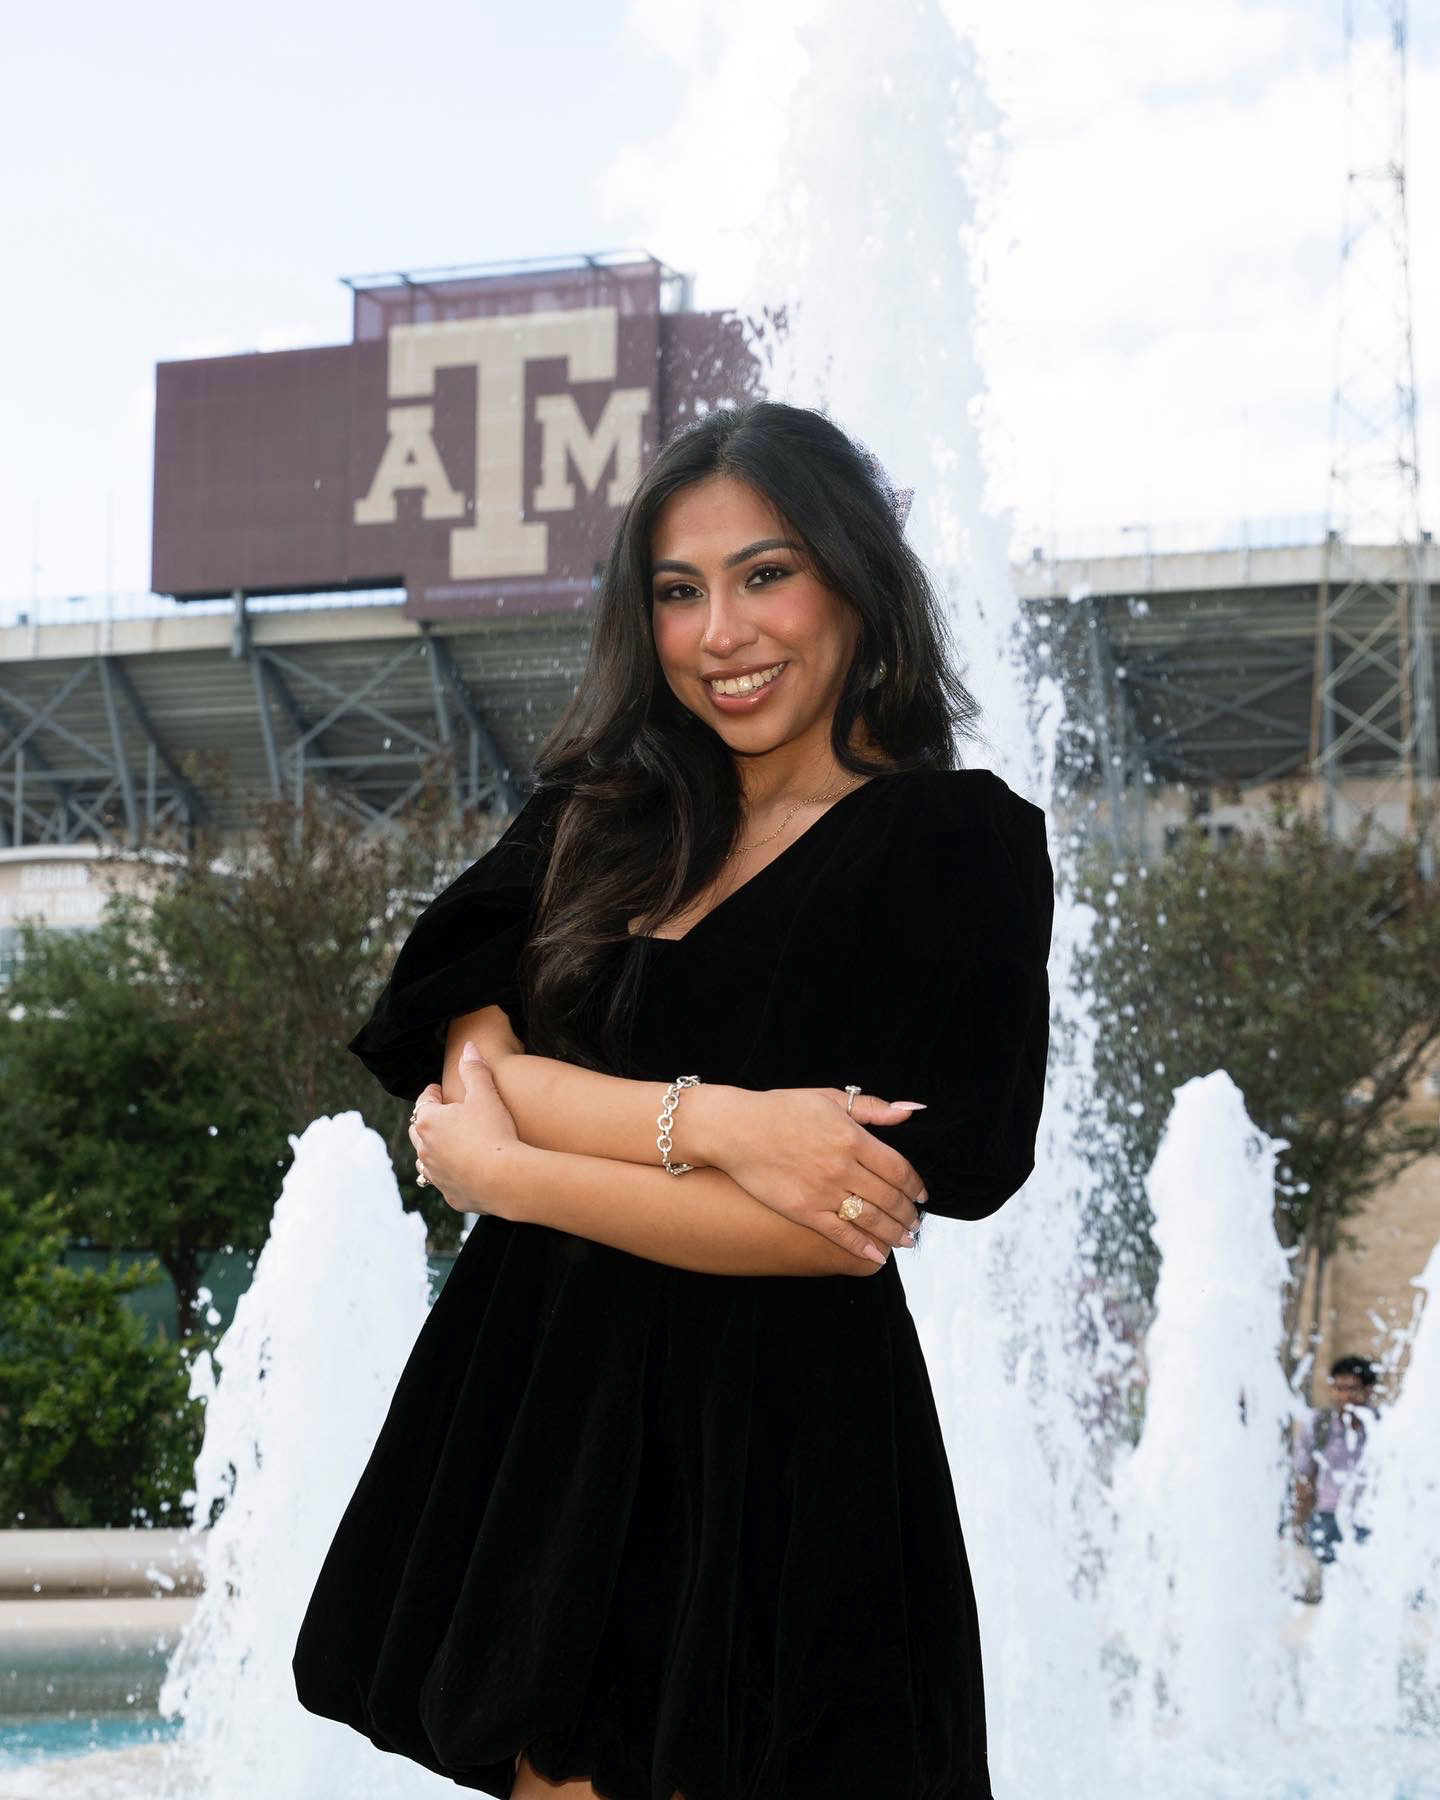 Texas A&amp;M women's and gender studies major Odyssey Olmos poses after receiving her Aggie Ring with the jumbotron at Kyle Field in the background